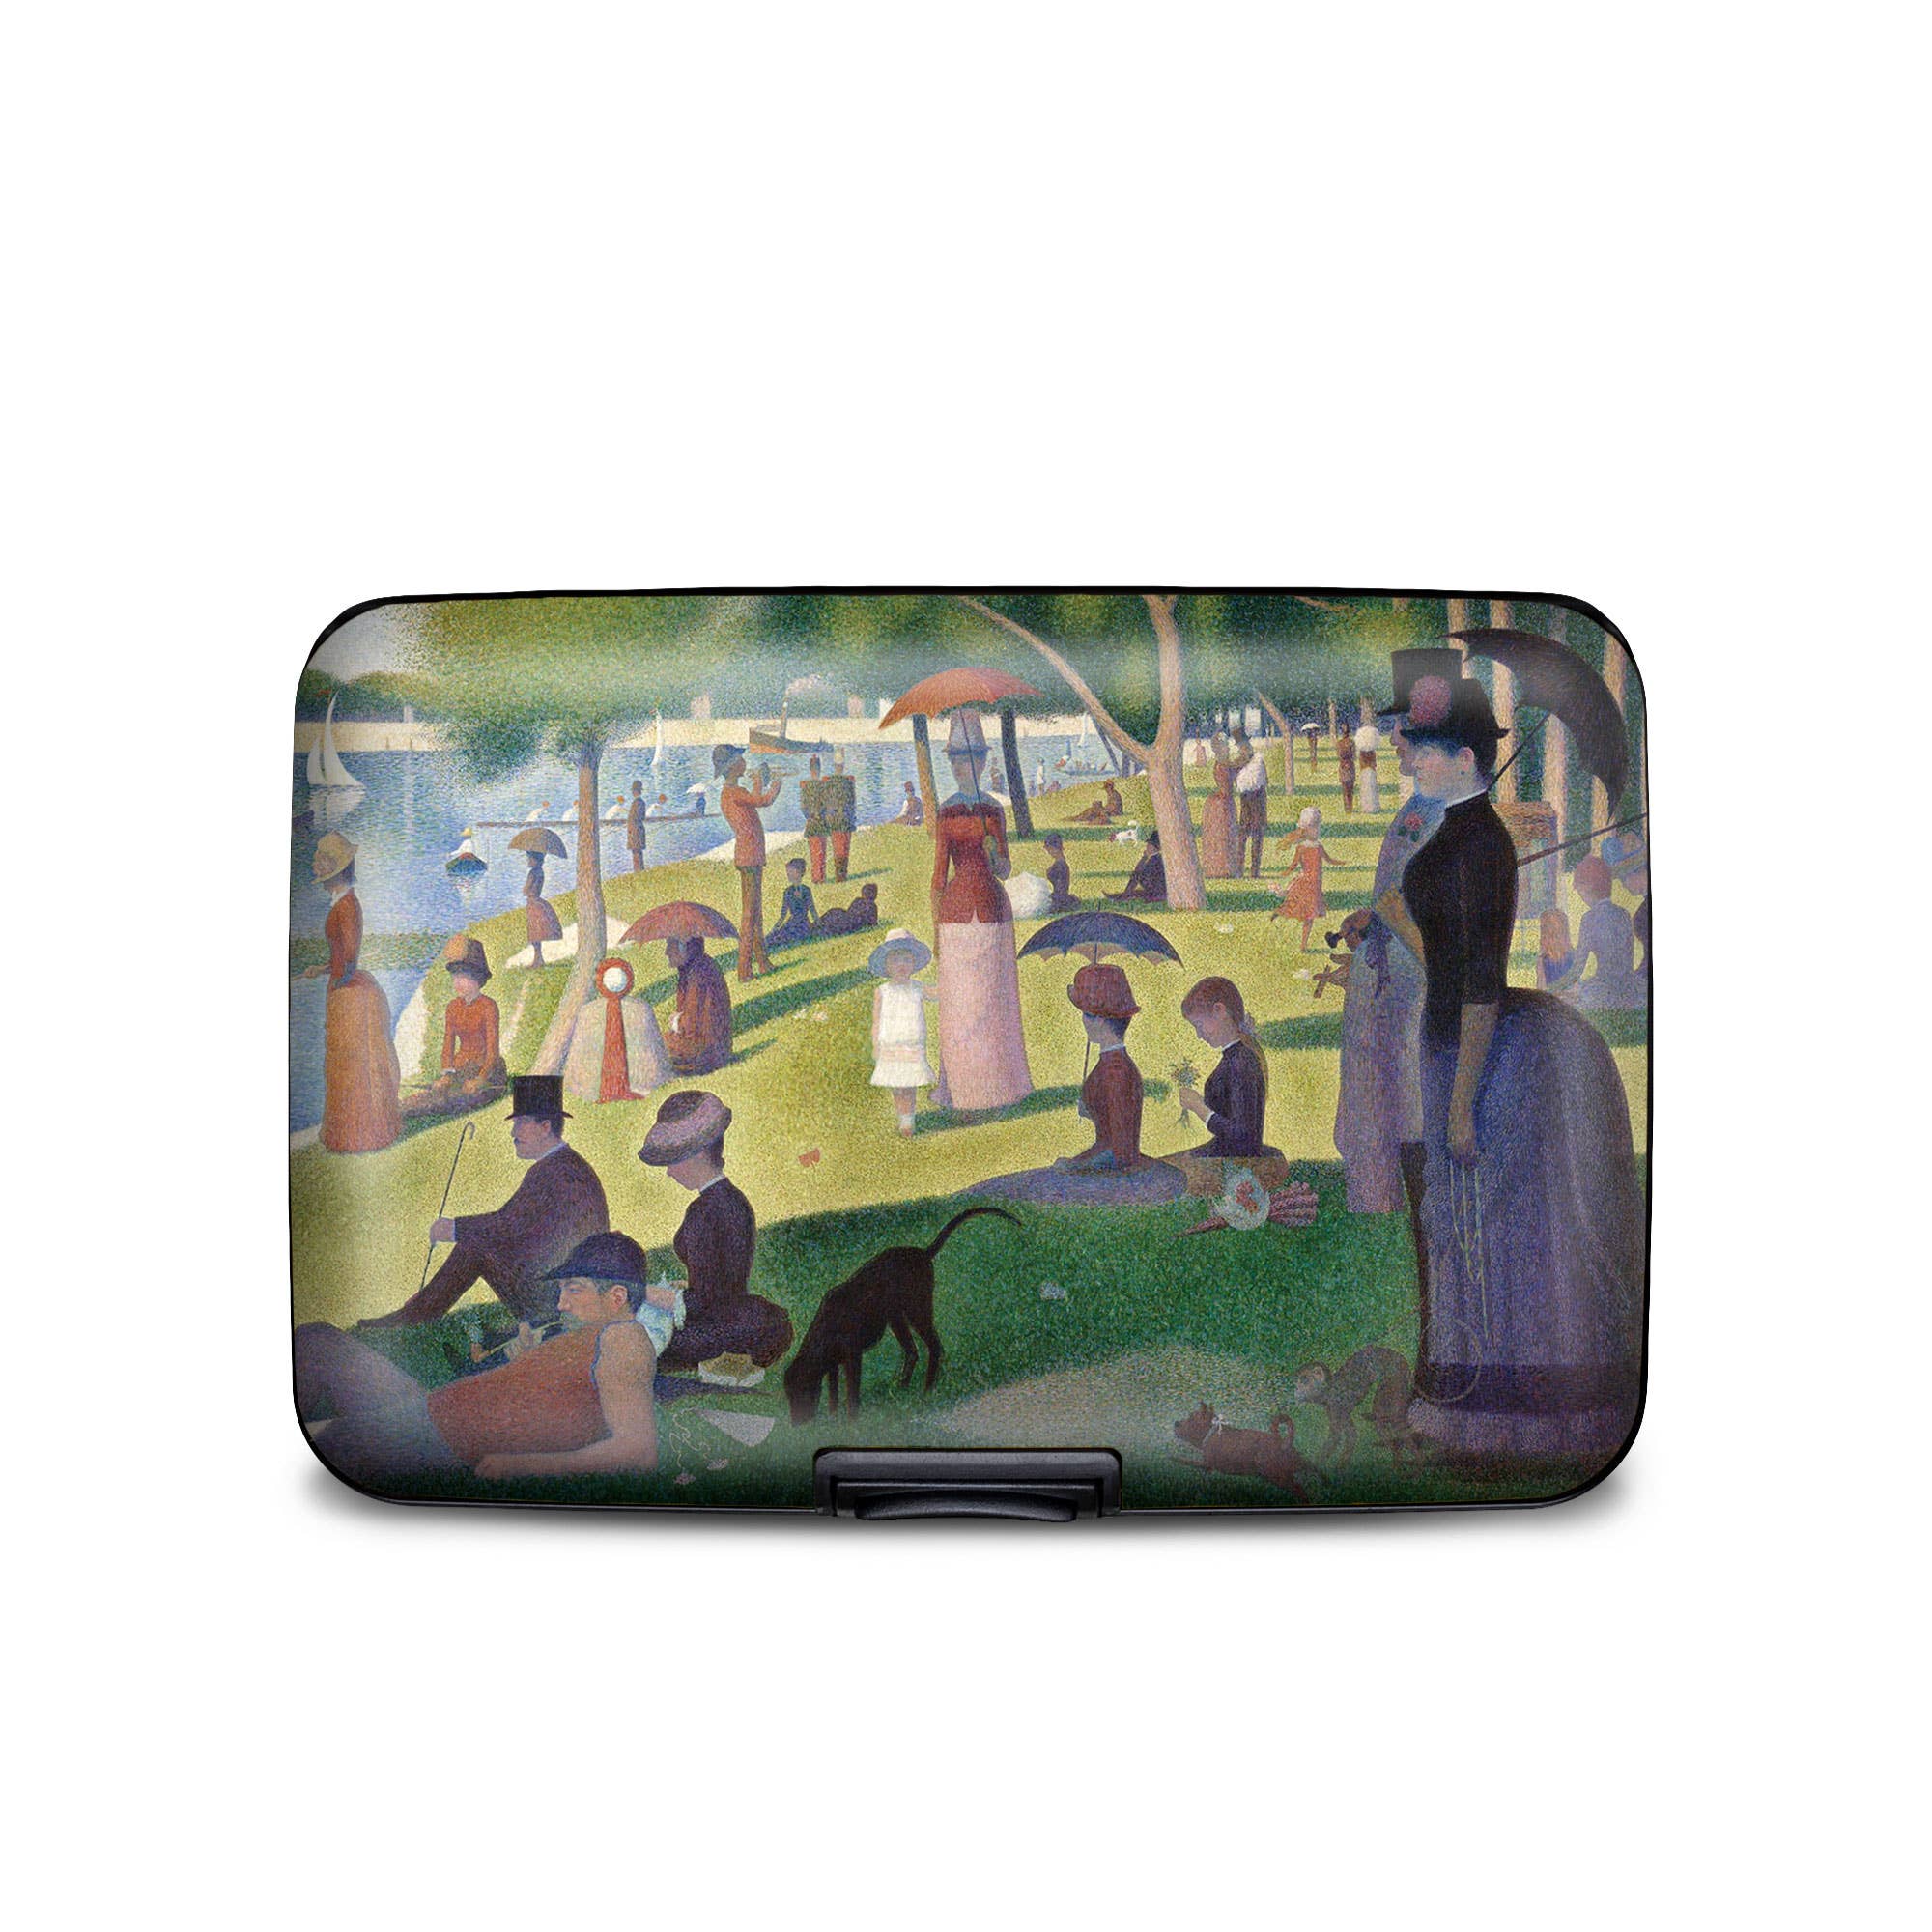 Monarque - Seurat, Sunday in the Park Armored Wallet